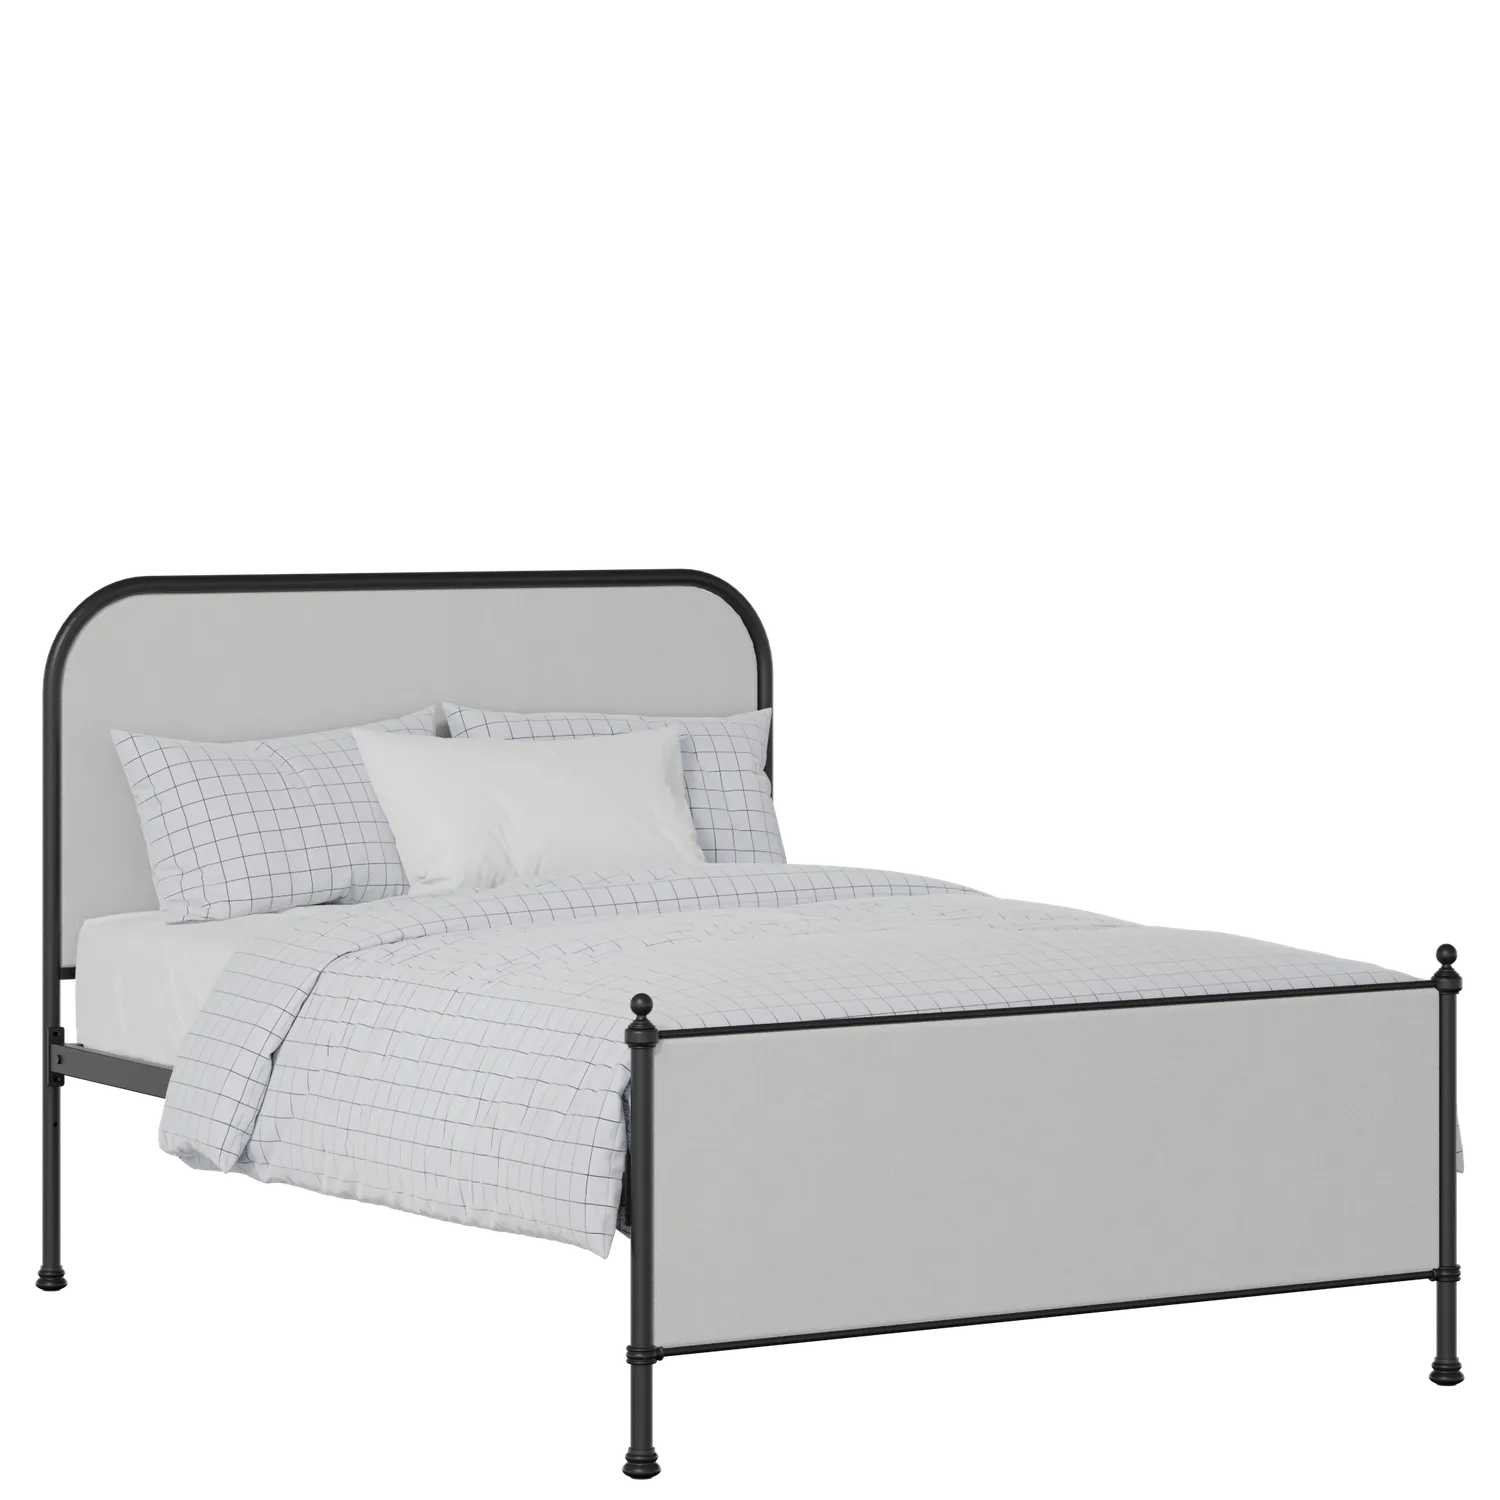 Bray iron/metal upholstered bed in black with silver fabric